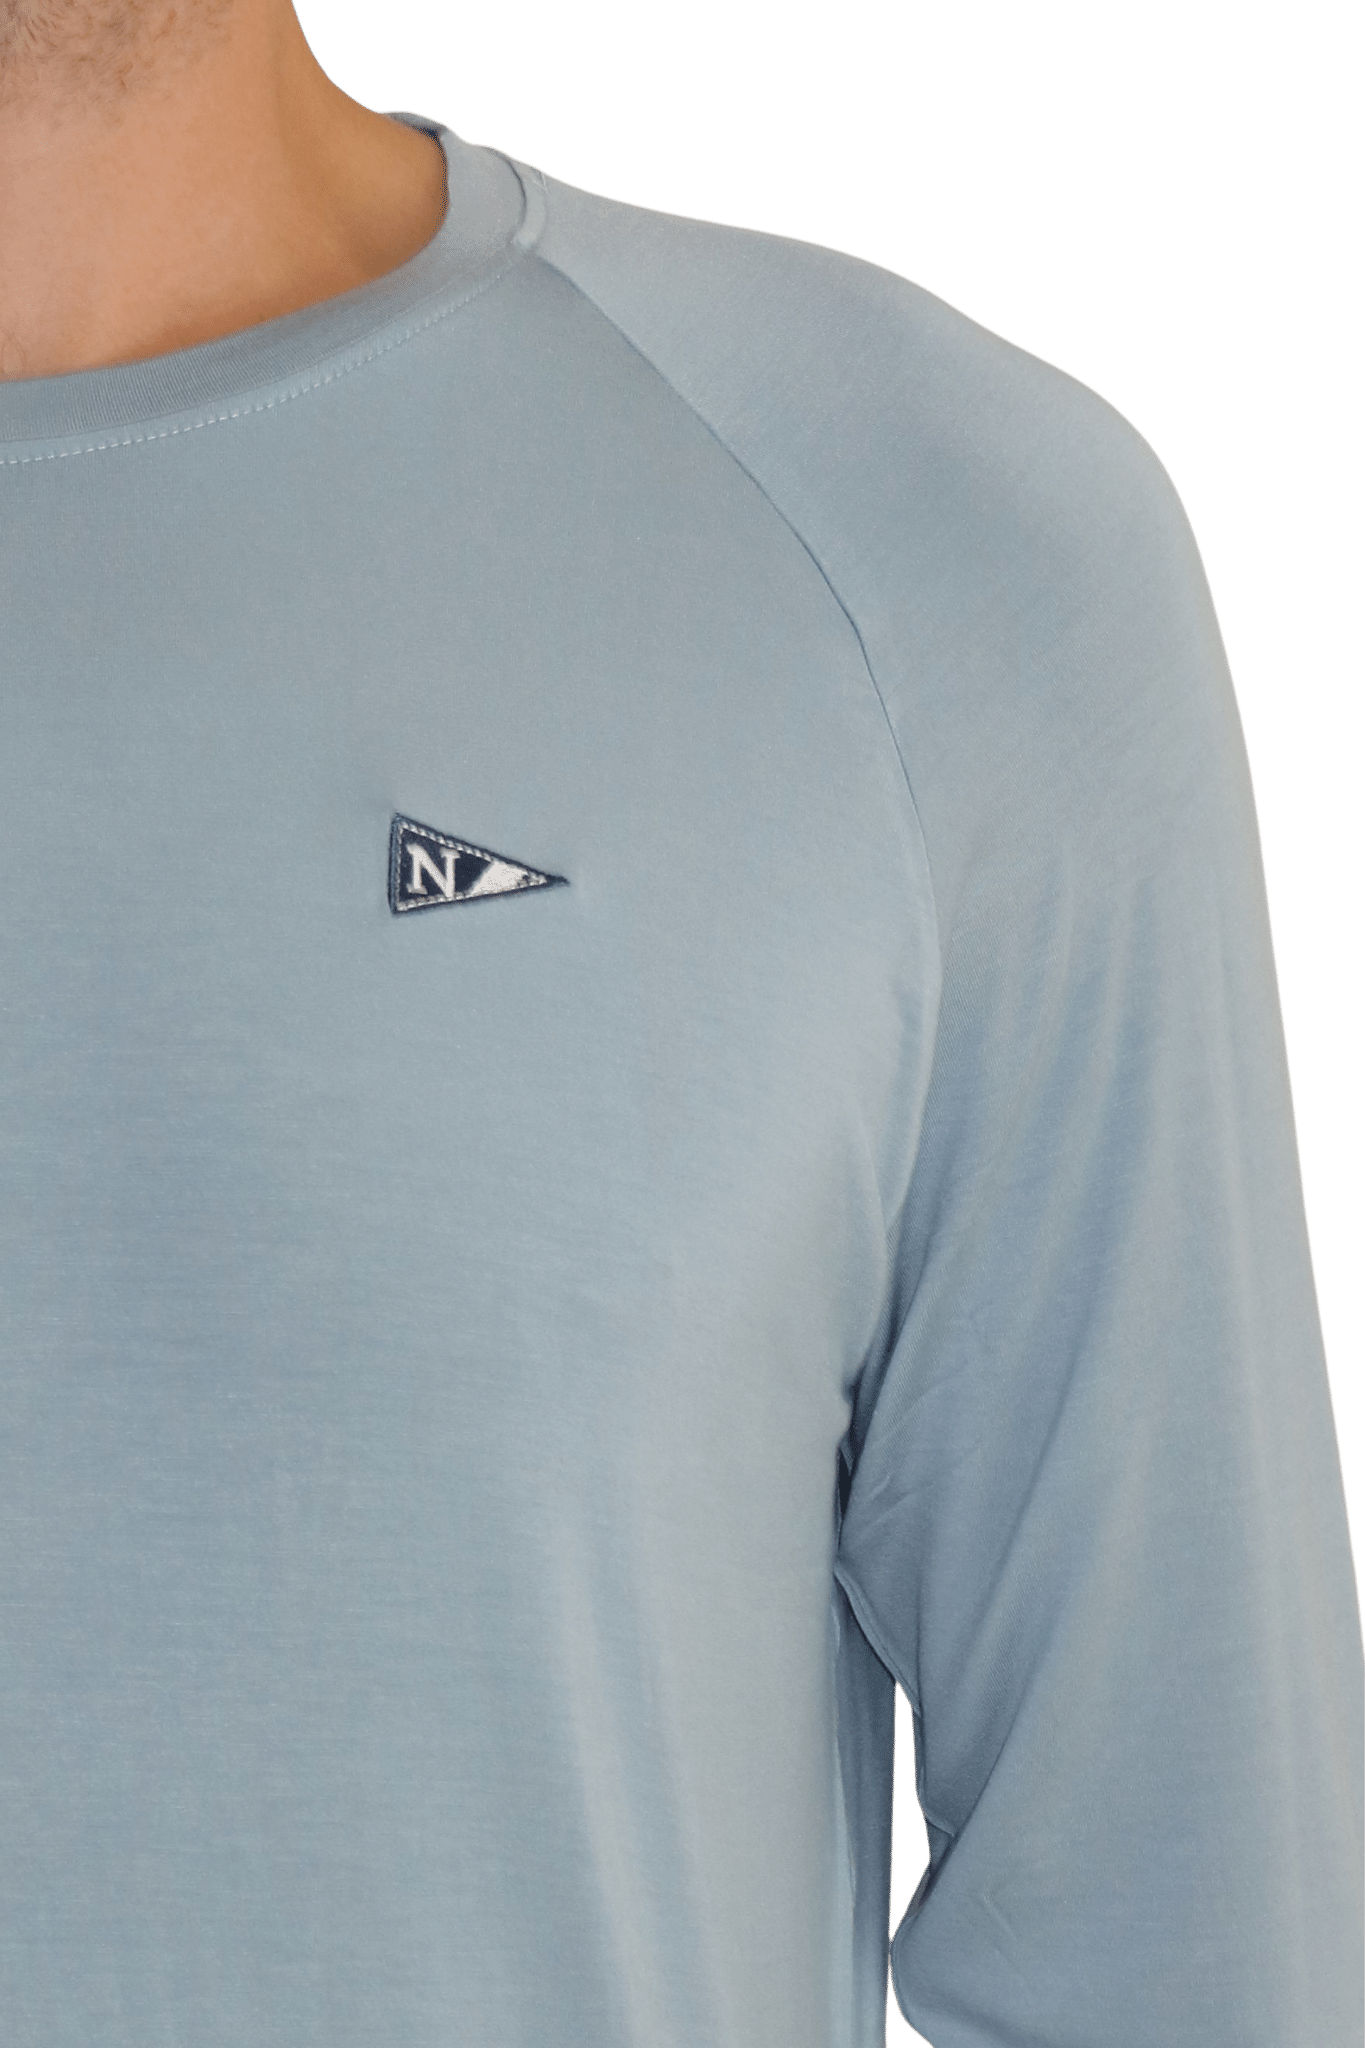 Front logo of the light ocean blue Icon long sleeve bamboo shirt.